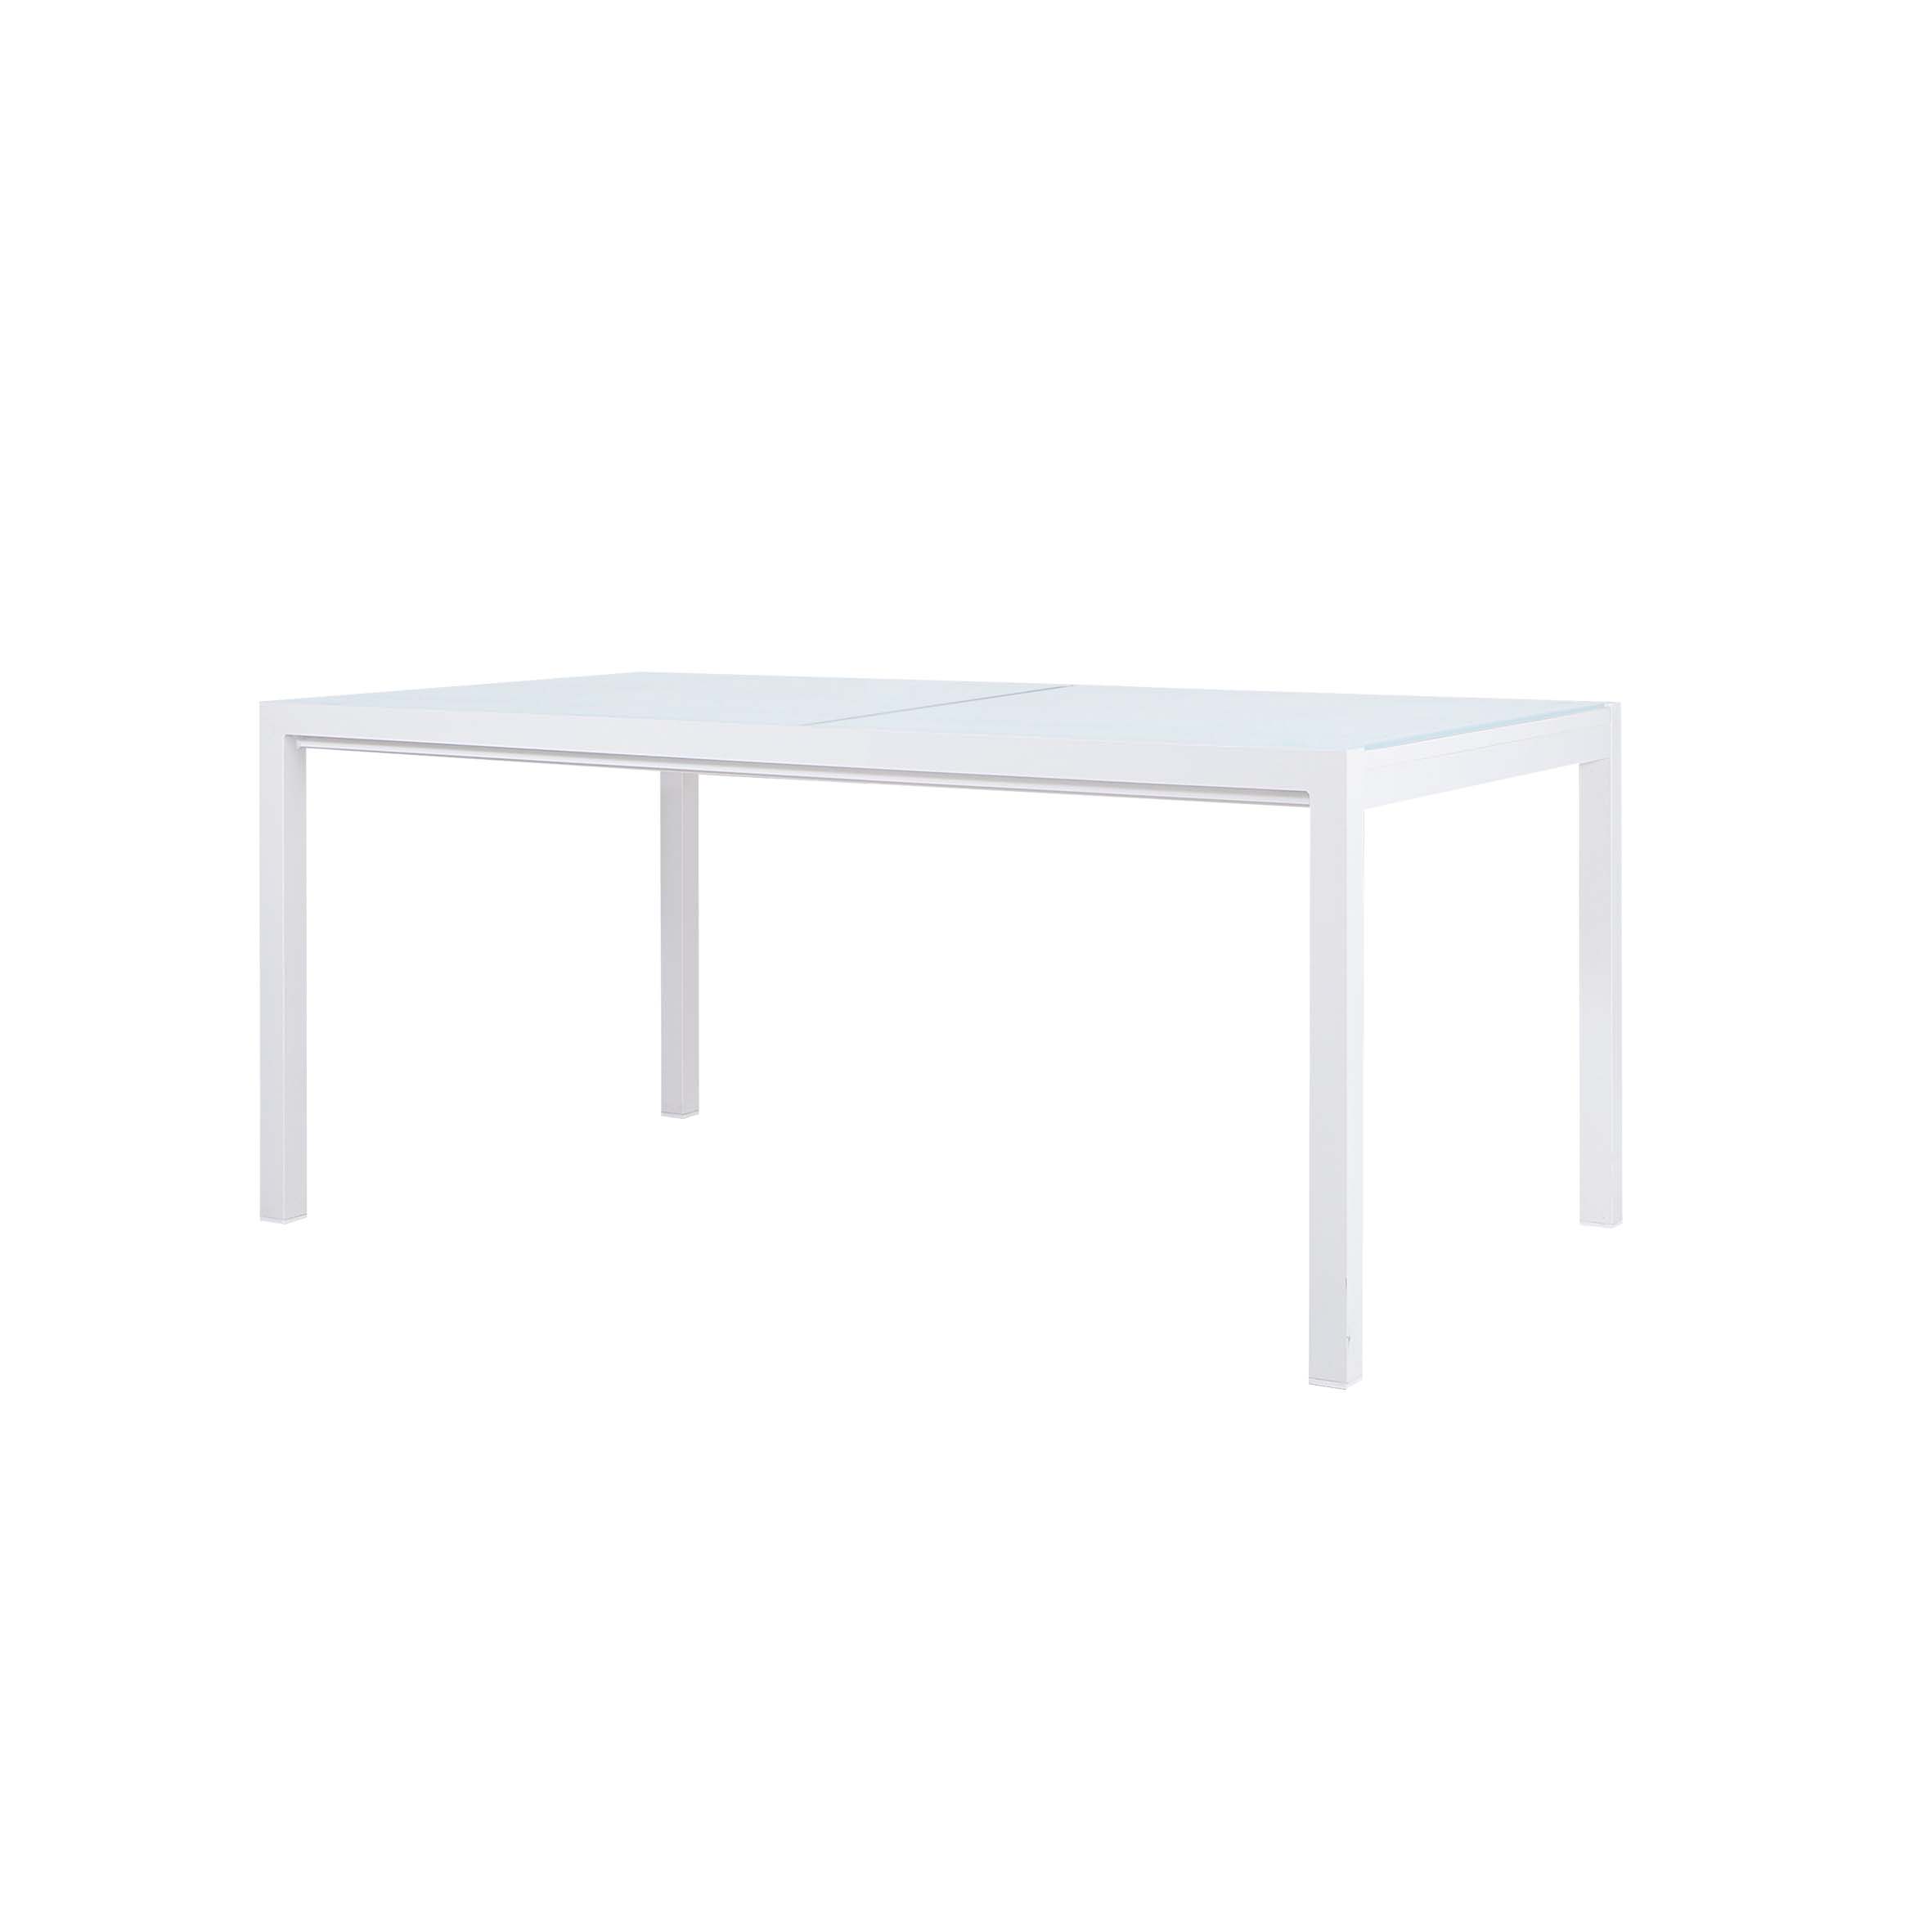 Kotka extension table S10